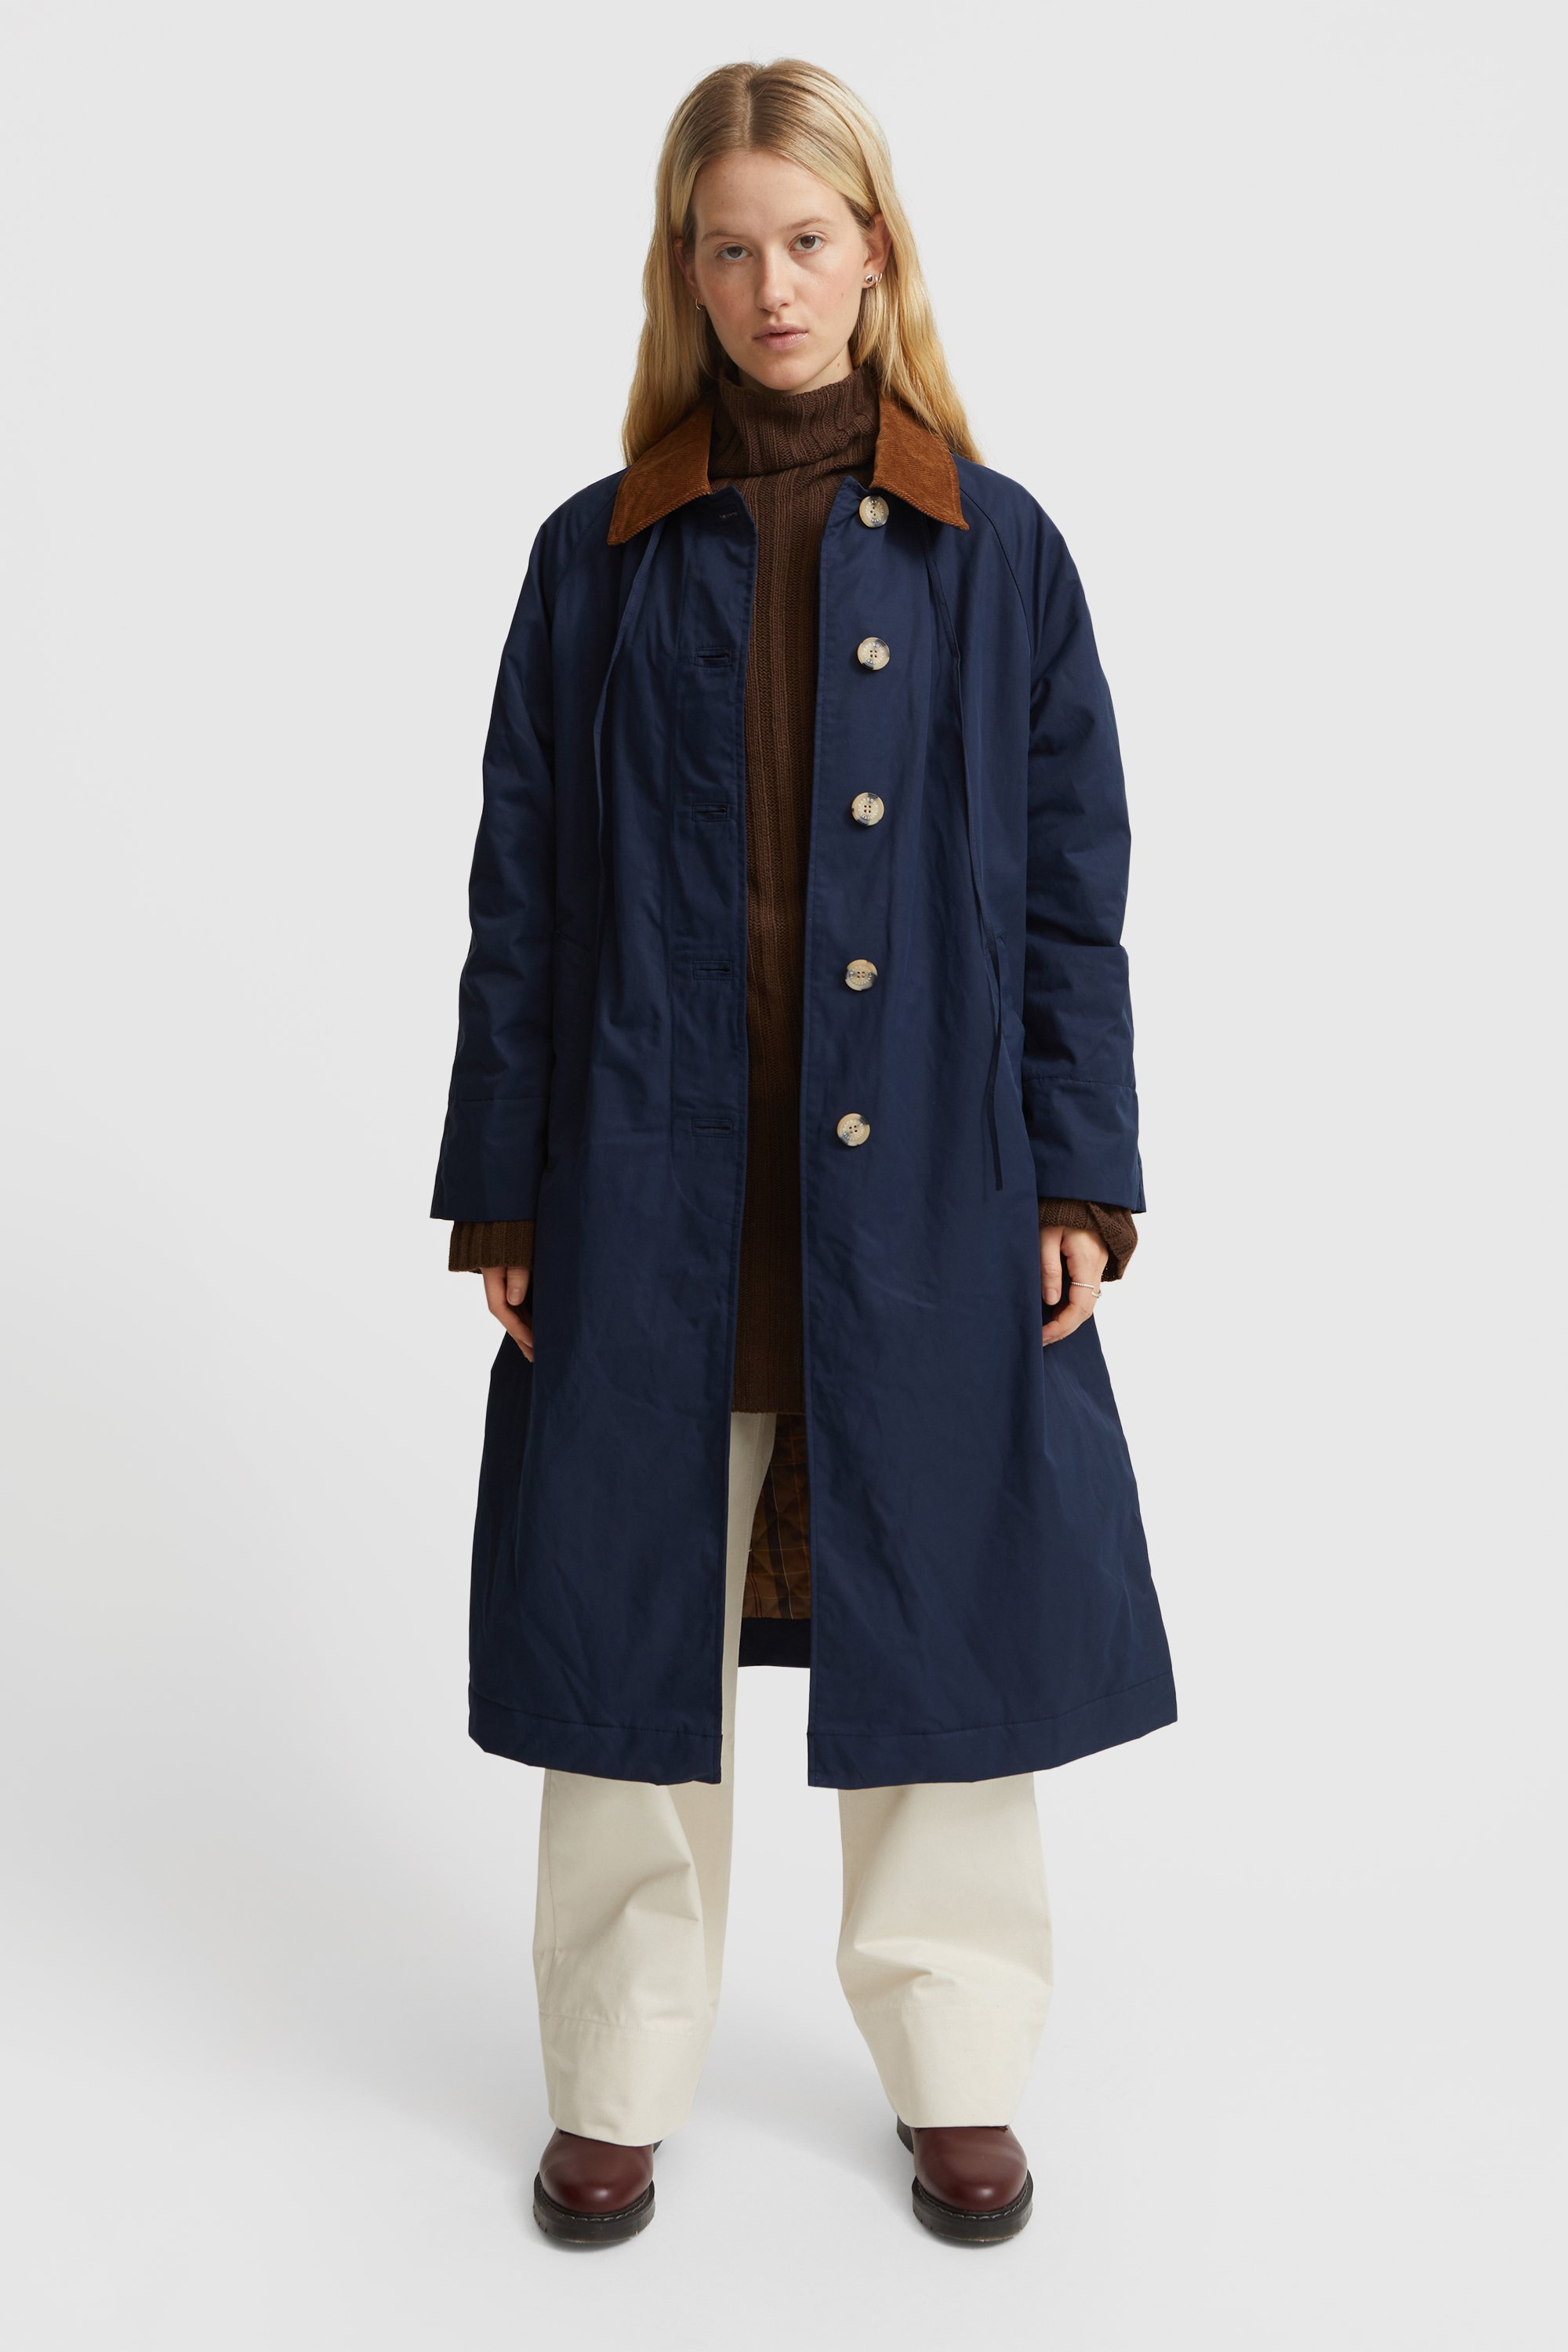 Barbour Barbour Jackie Casual Royal navy/muted | WoodWood.com